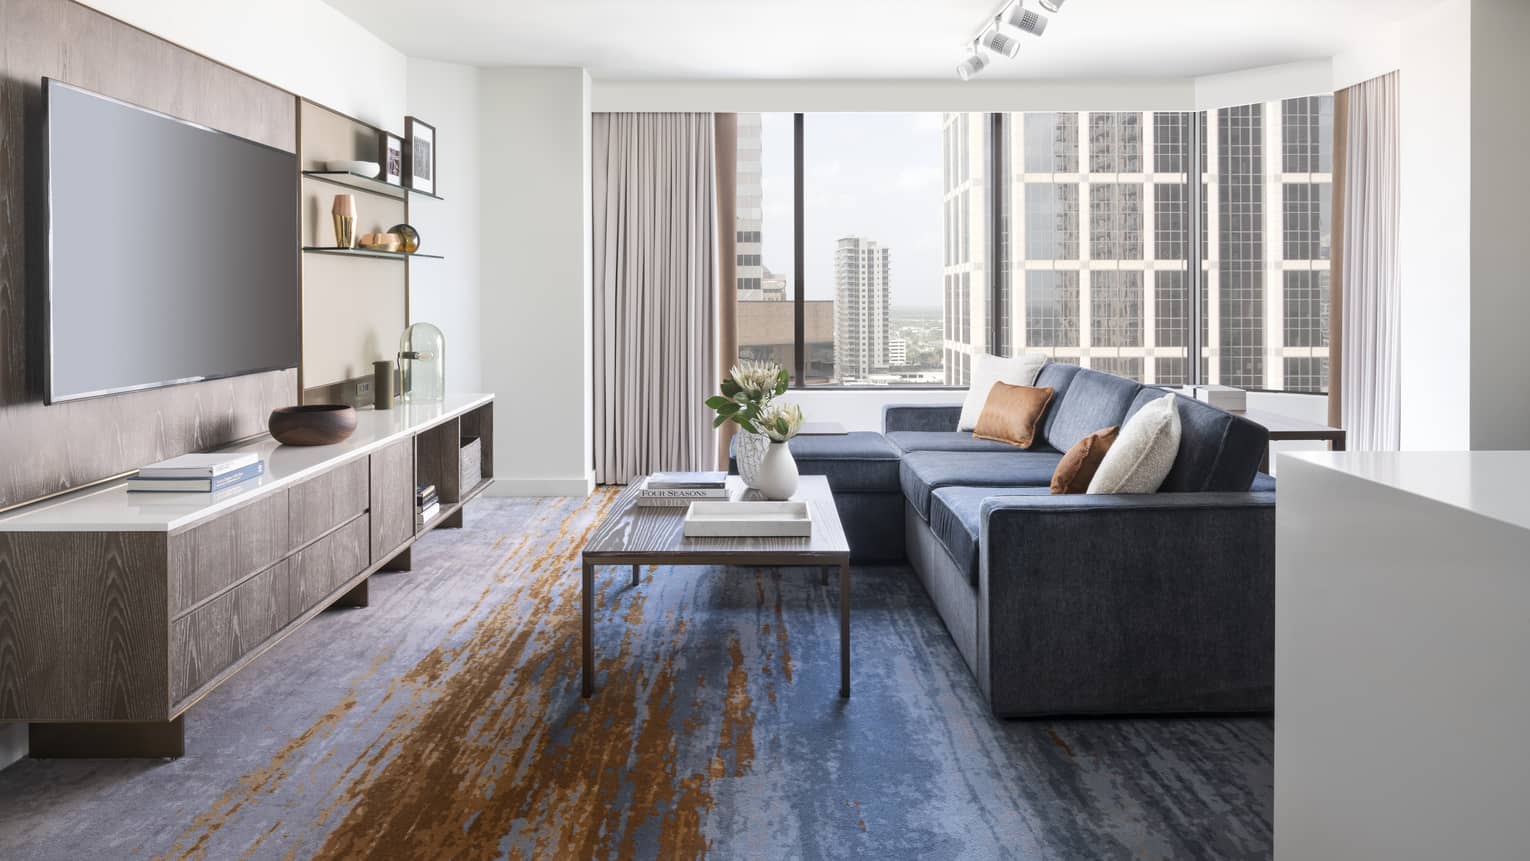 Two-bedroom Residential Suite living area with navy sectional sofa, floor-to-ceiling windows, city views